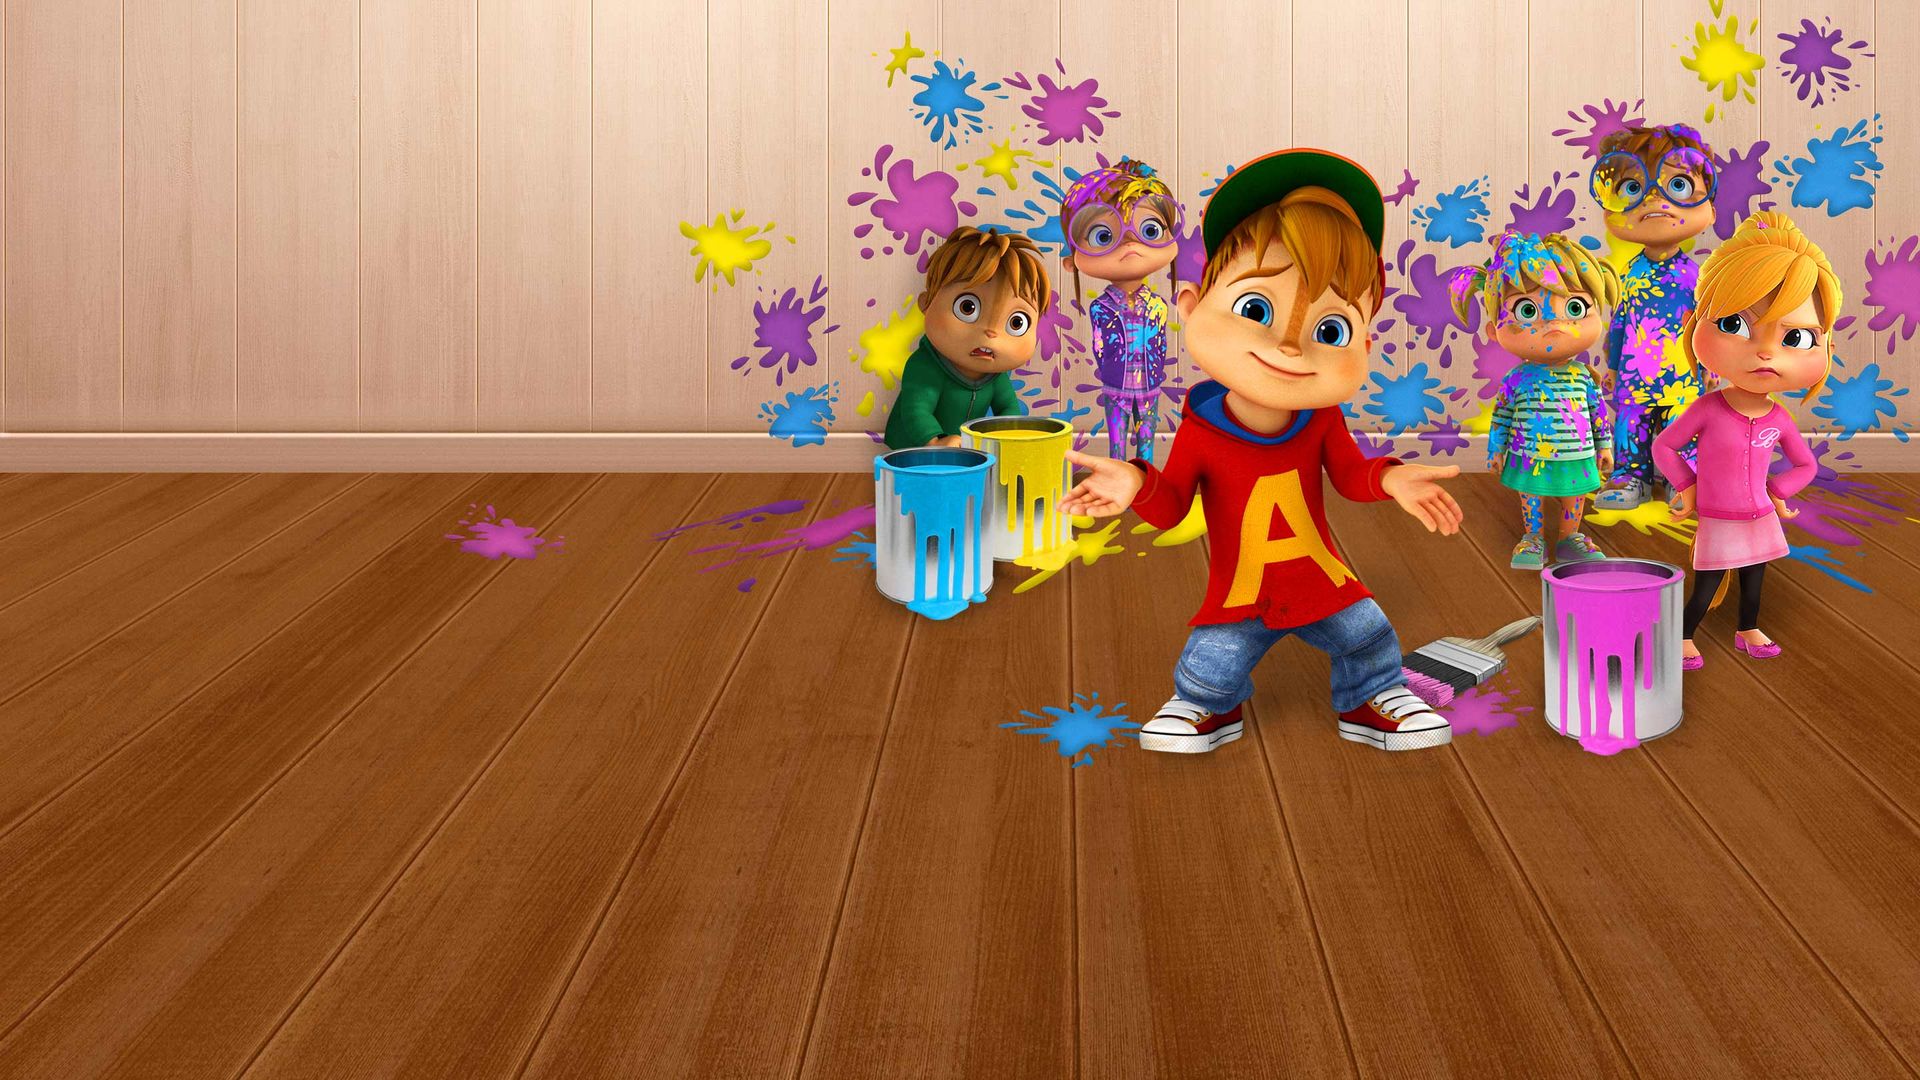 Alvin and the Chipmunks: Singing In A Car - ALVINNN!!! and The Chipmunks  (Video Clip)